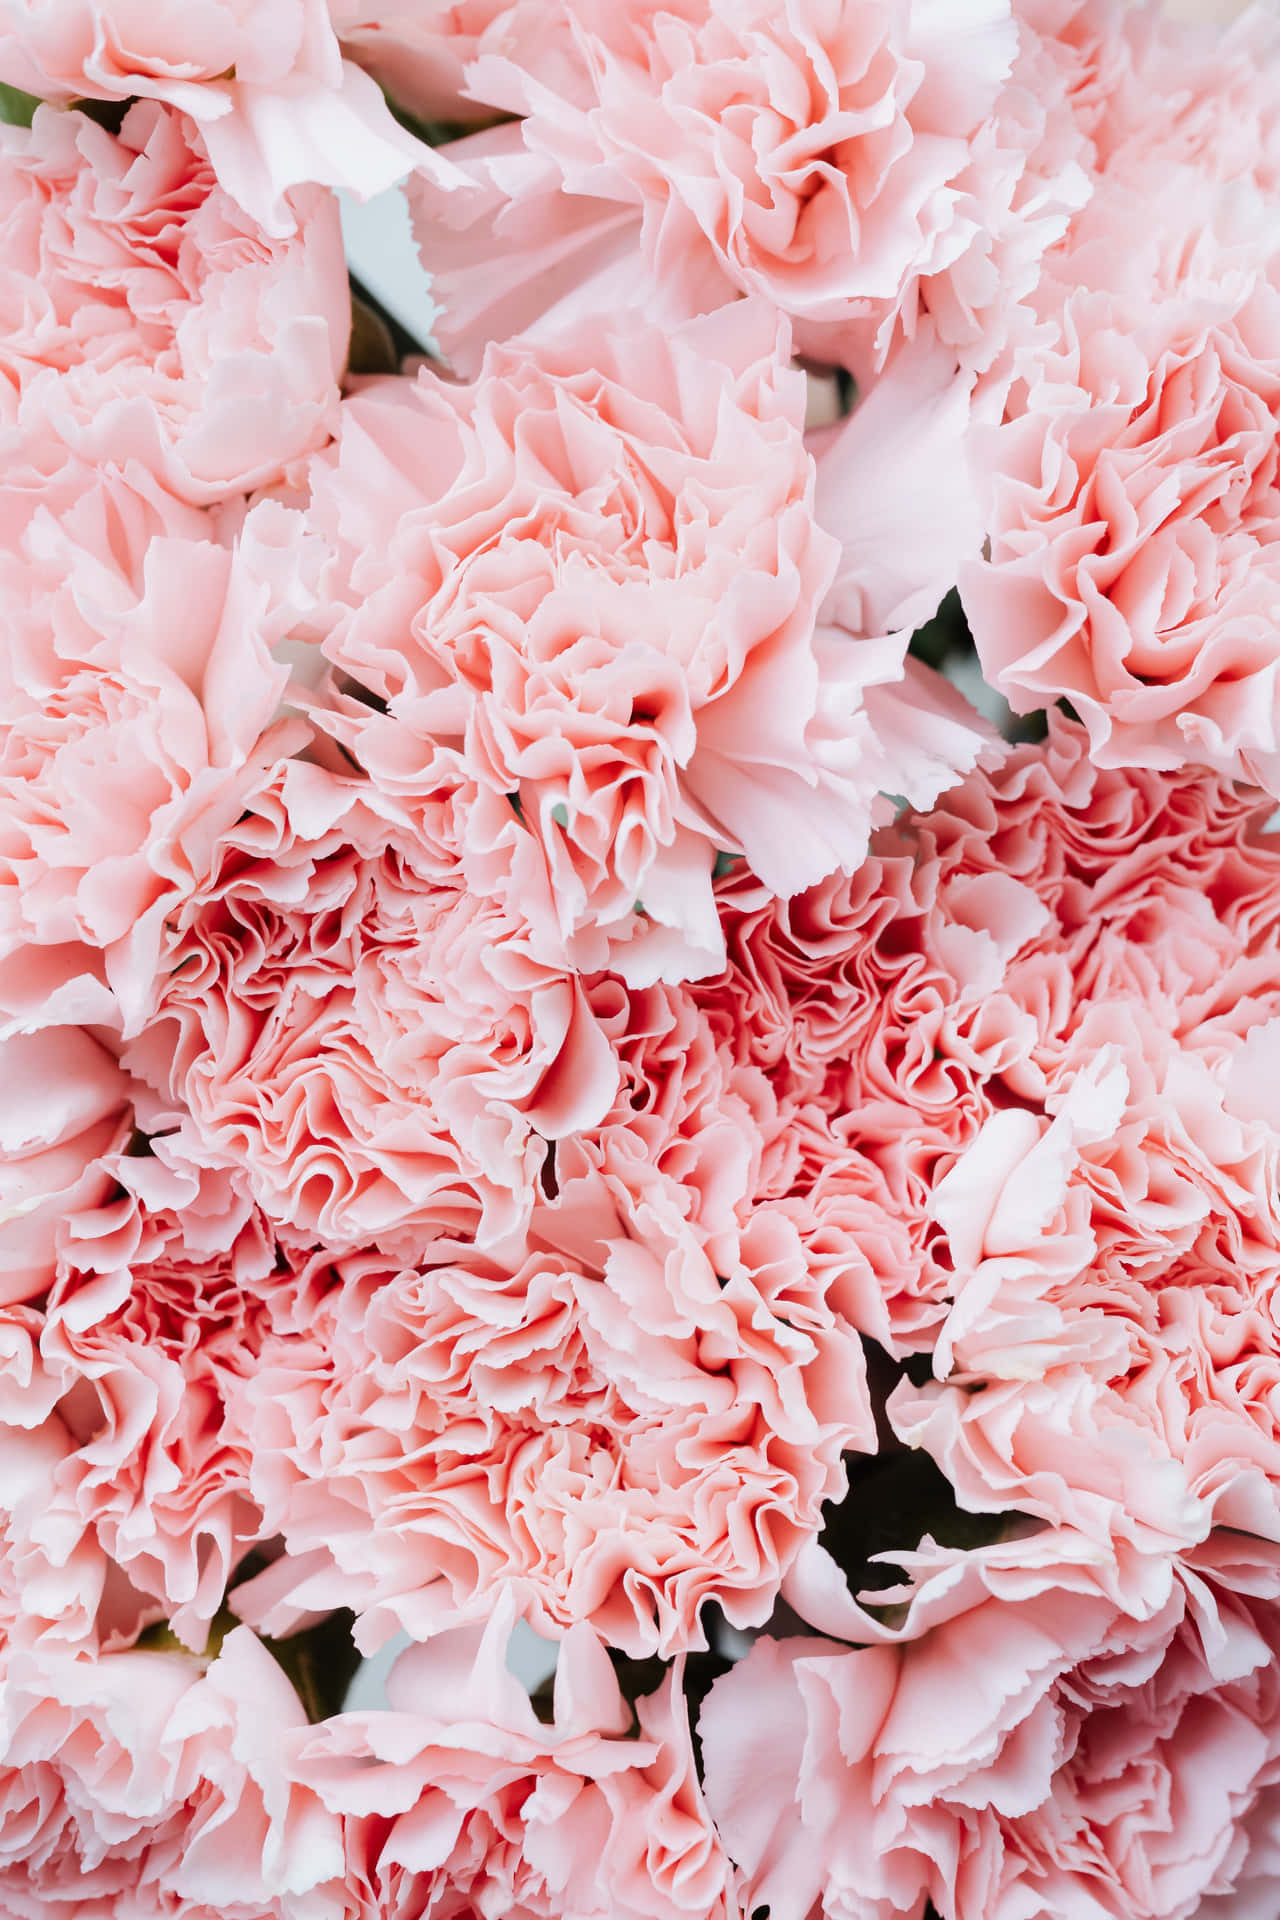 Brighten Up Your Day with a Gorgeous Pink Flower